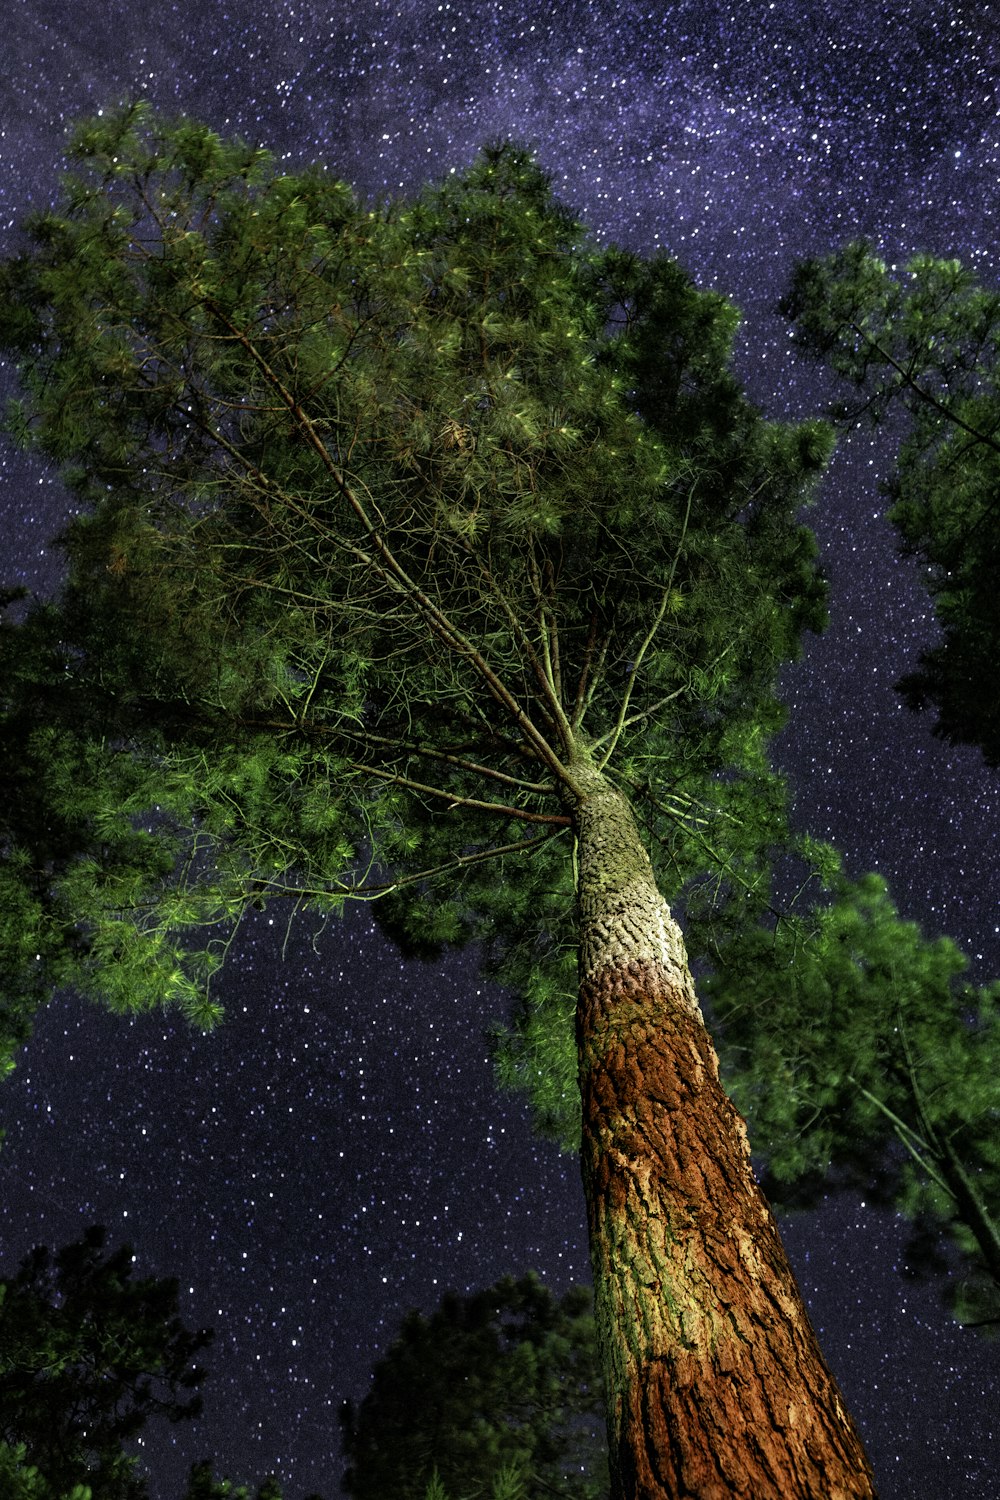 a tall tree standing in the middle of a forest under a night sky filled with